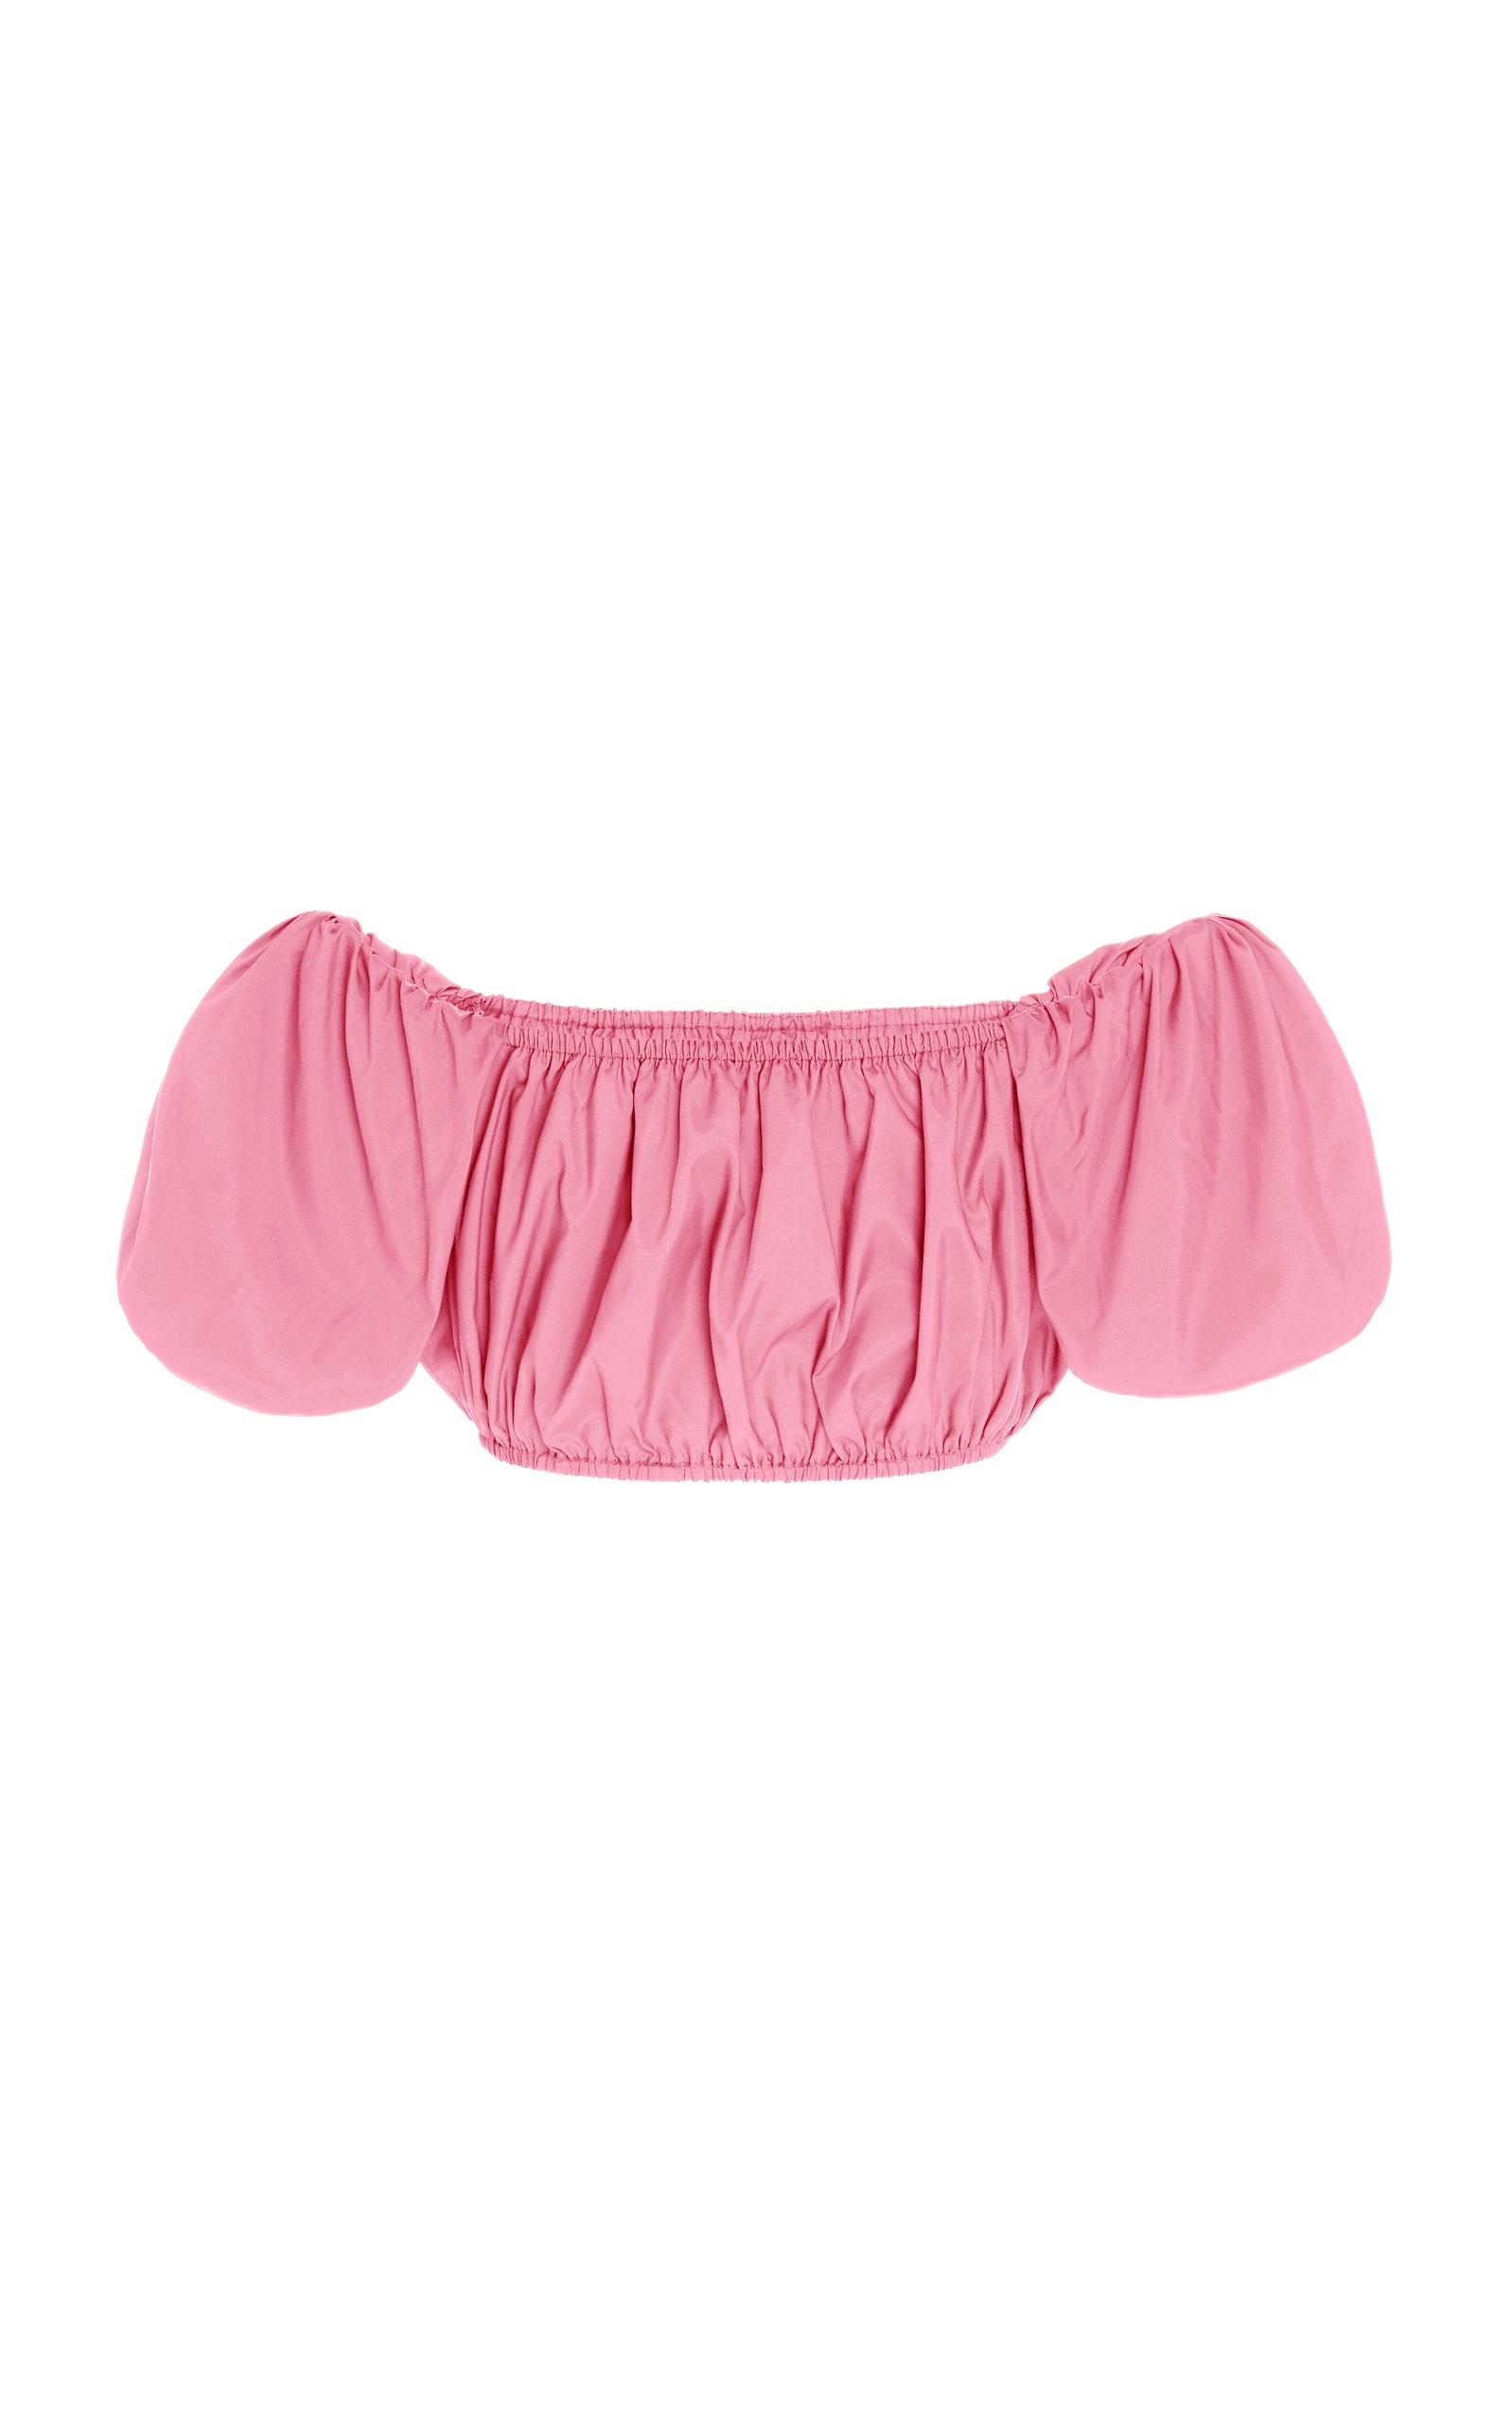 STAUD Synthetic Ant Off-the-shoulder Broadcloth Bra Top in Pink - Lyst